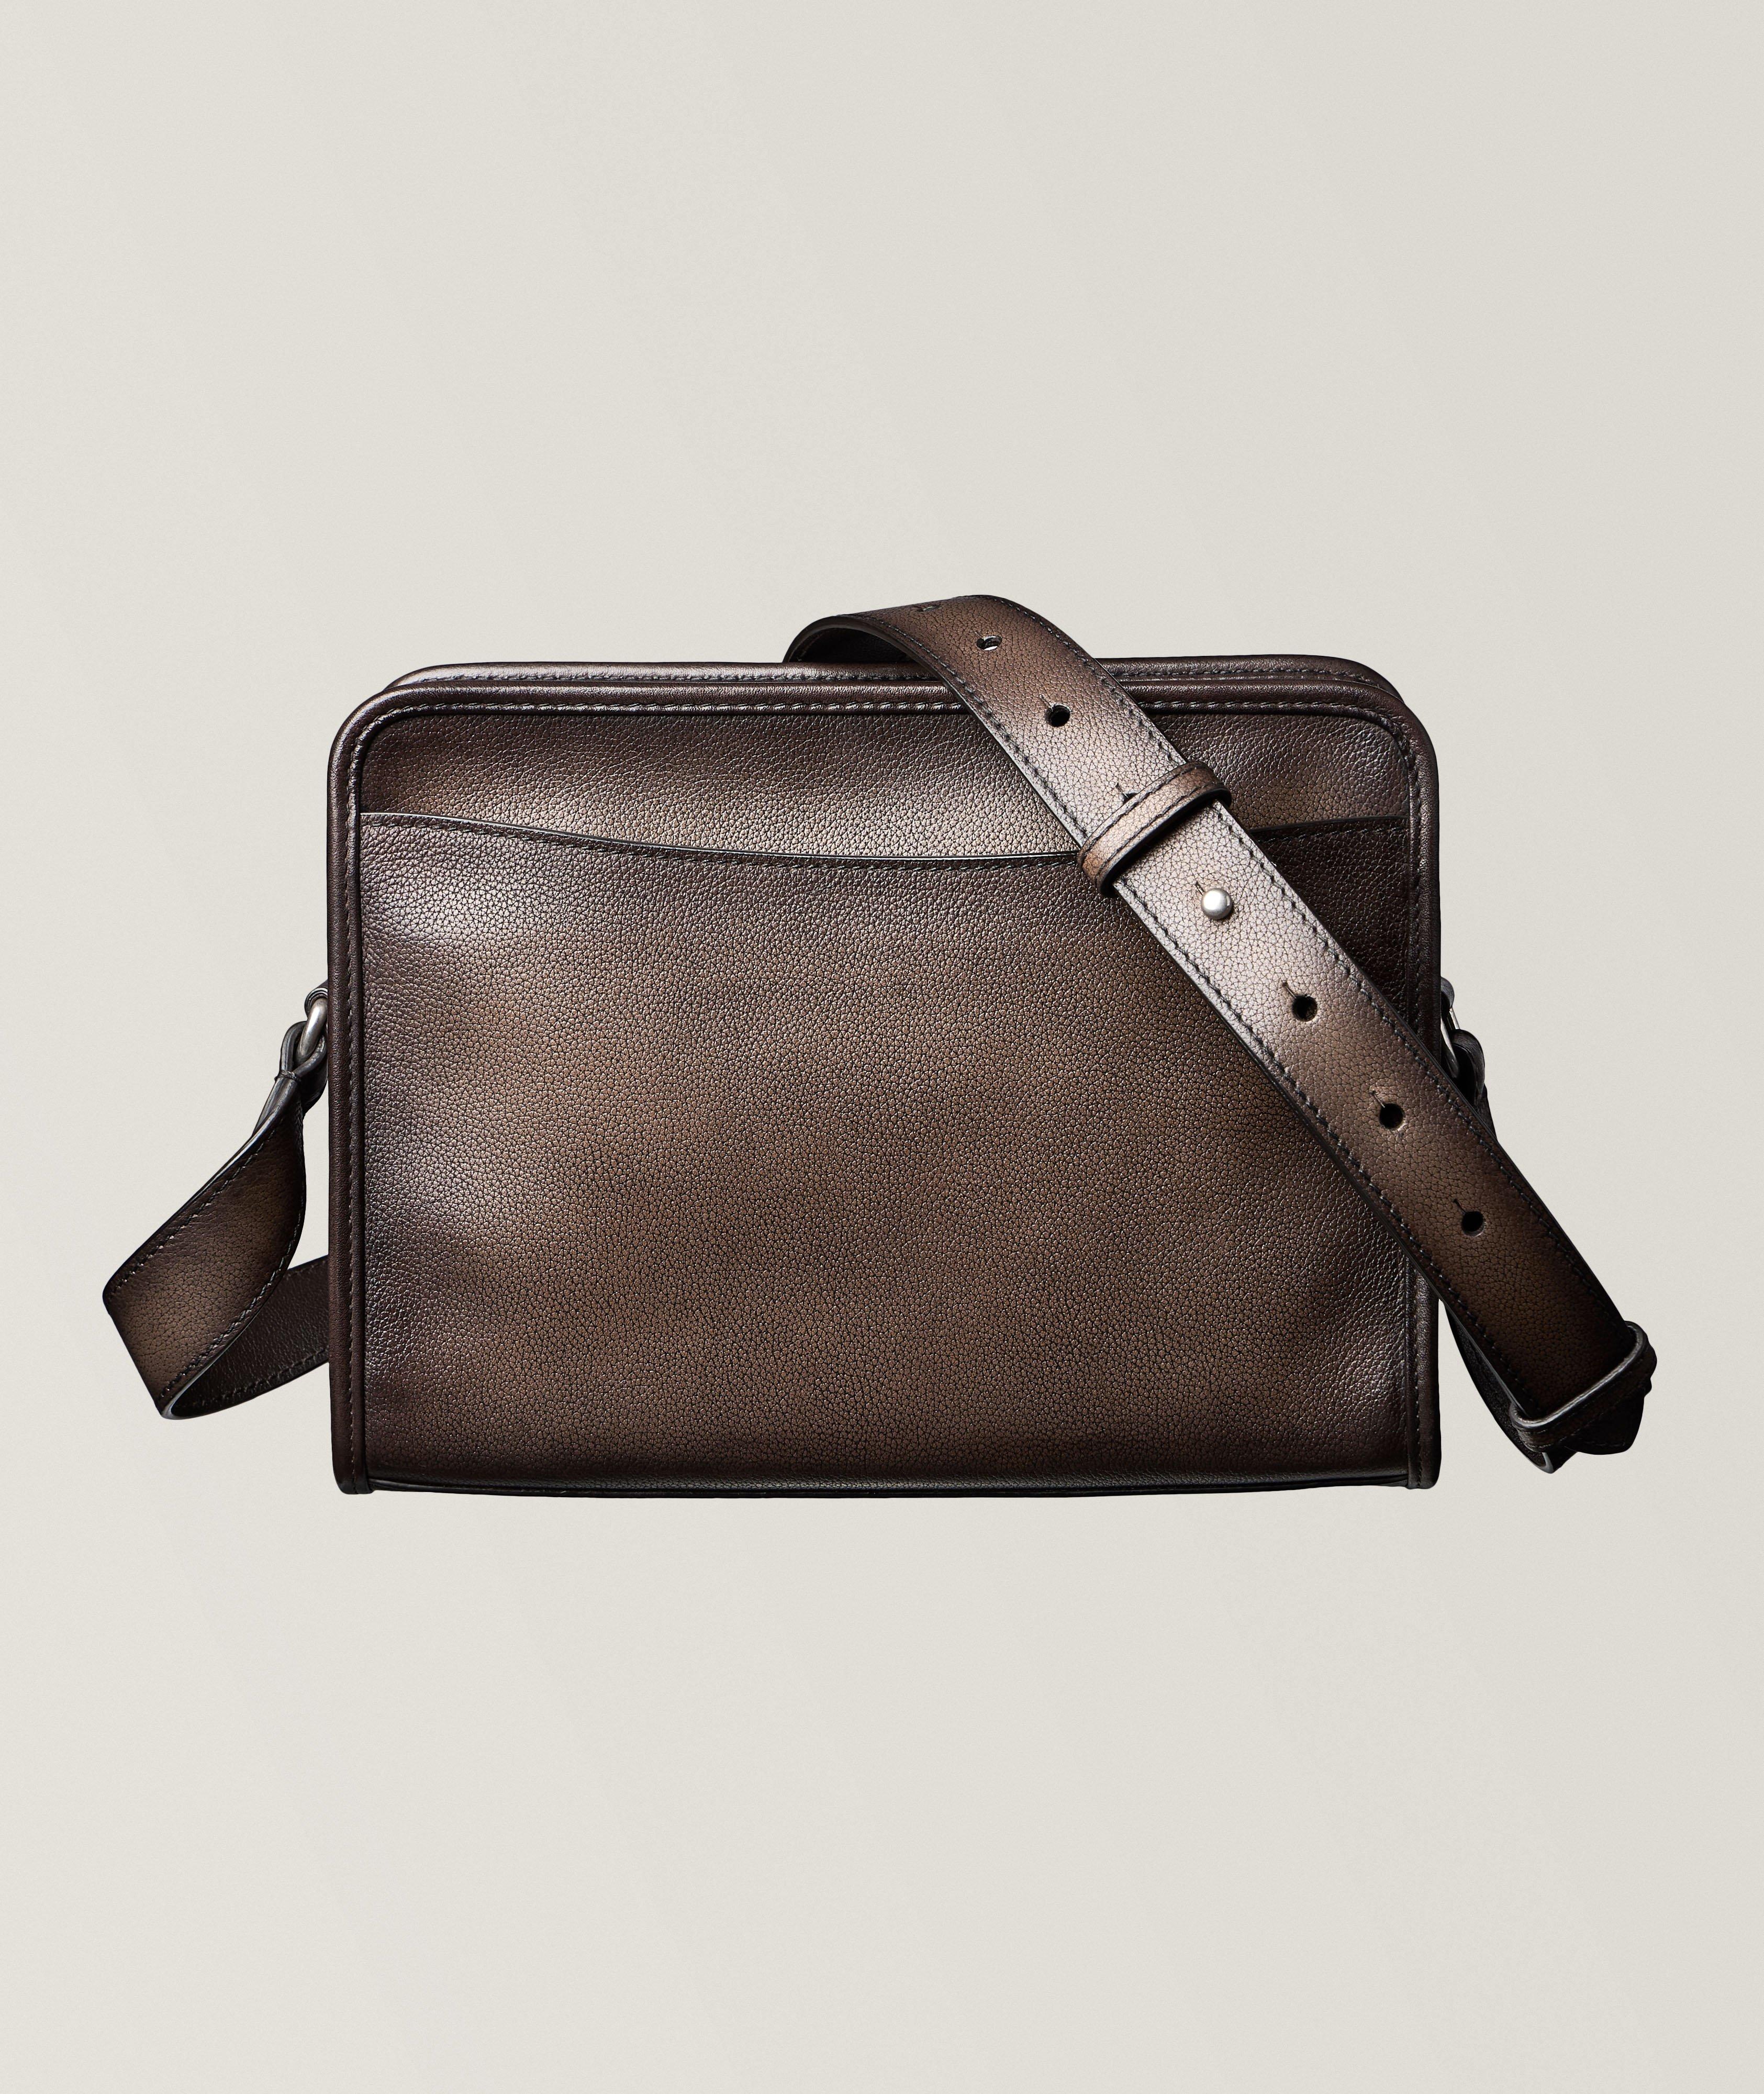 Soft Grained Leather Journalier Bag image 1